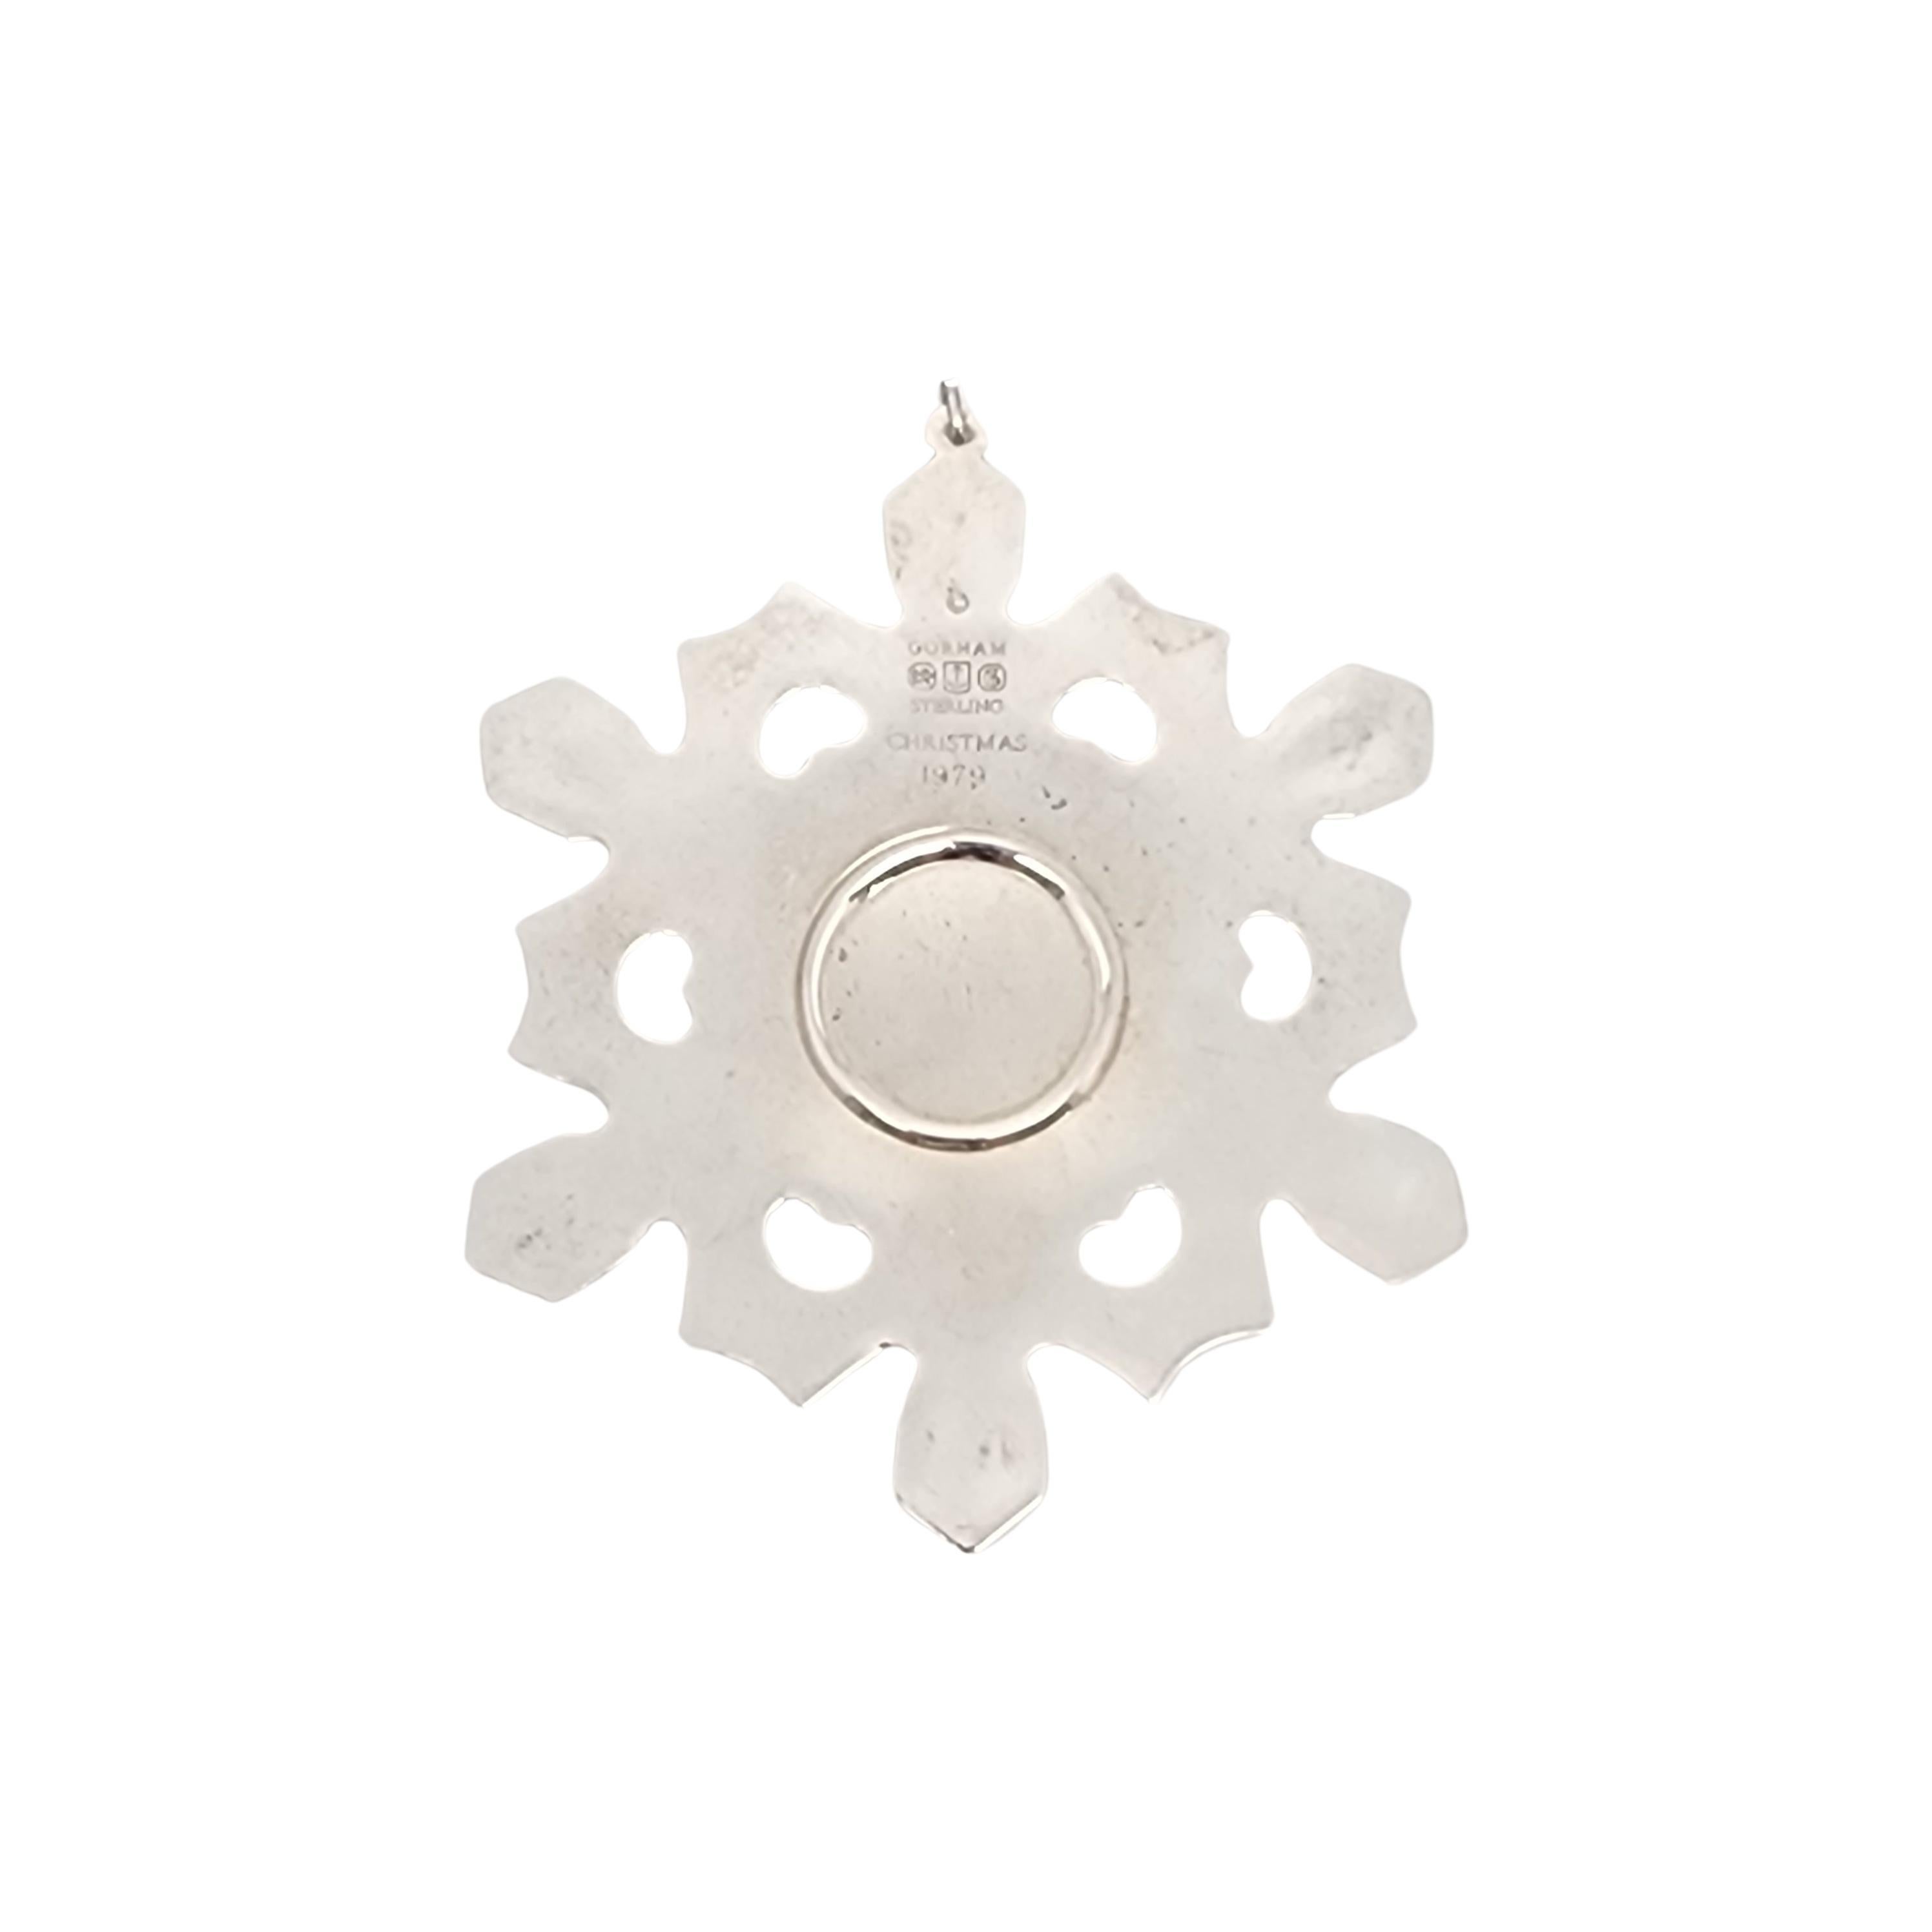 Gorham sterling silver snowflake ornament from 1979.

Since 1970, Gorham has been celebrating the season with a yearly version of the classic snowflake form, creating a beautiful tradition of sparkling art.

Measures approx 3 1/2